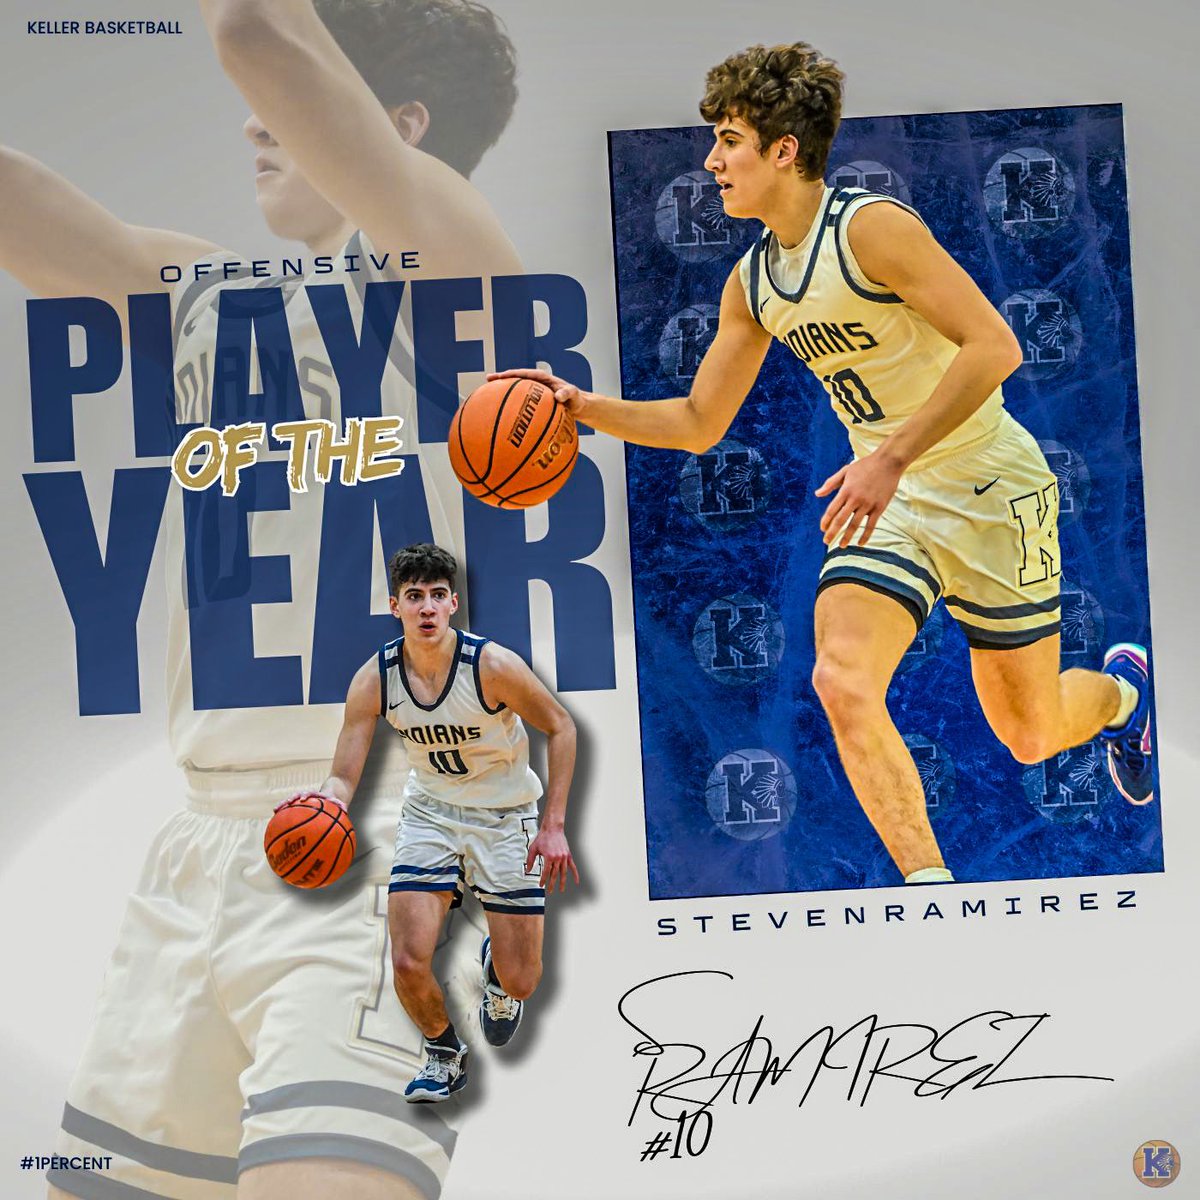 Congratulations to @stevenram2025 on being selected as the Offensive Player of the Year in District 4-6A! #1percent @Tabchoops @Gosset41 @PrepHoopsTX @PaulMDaRealTalk